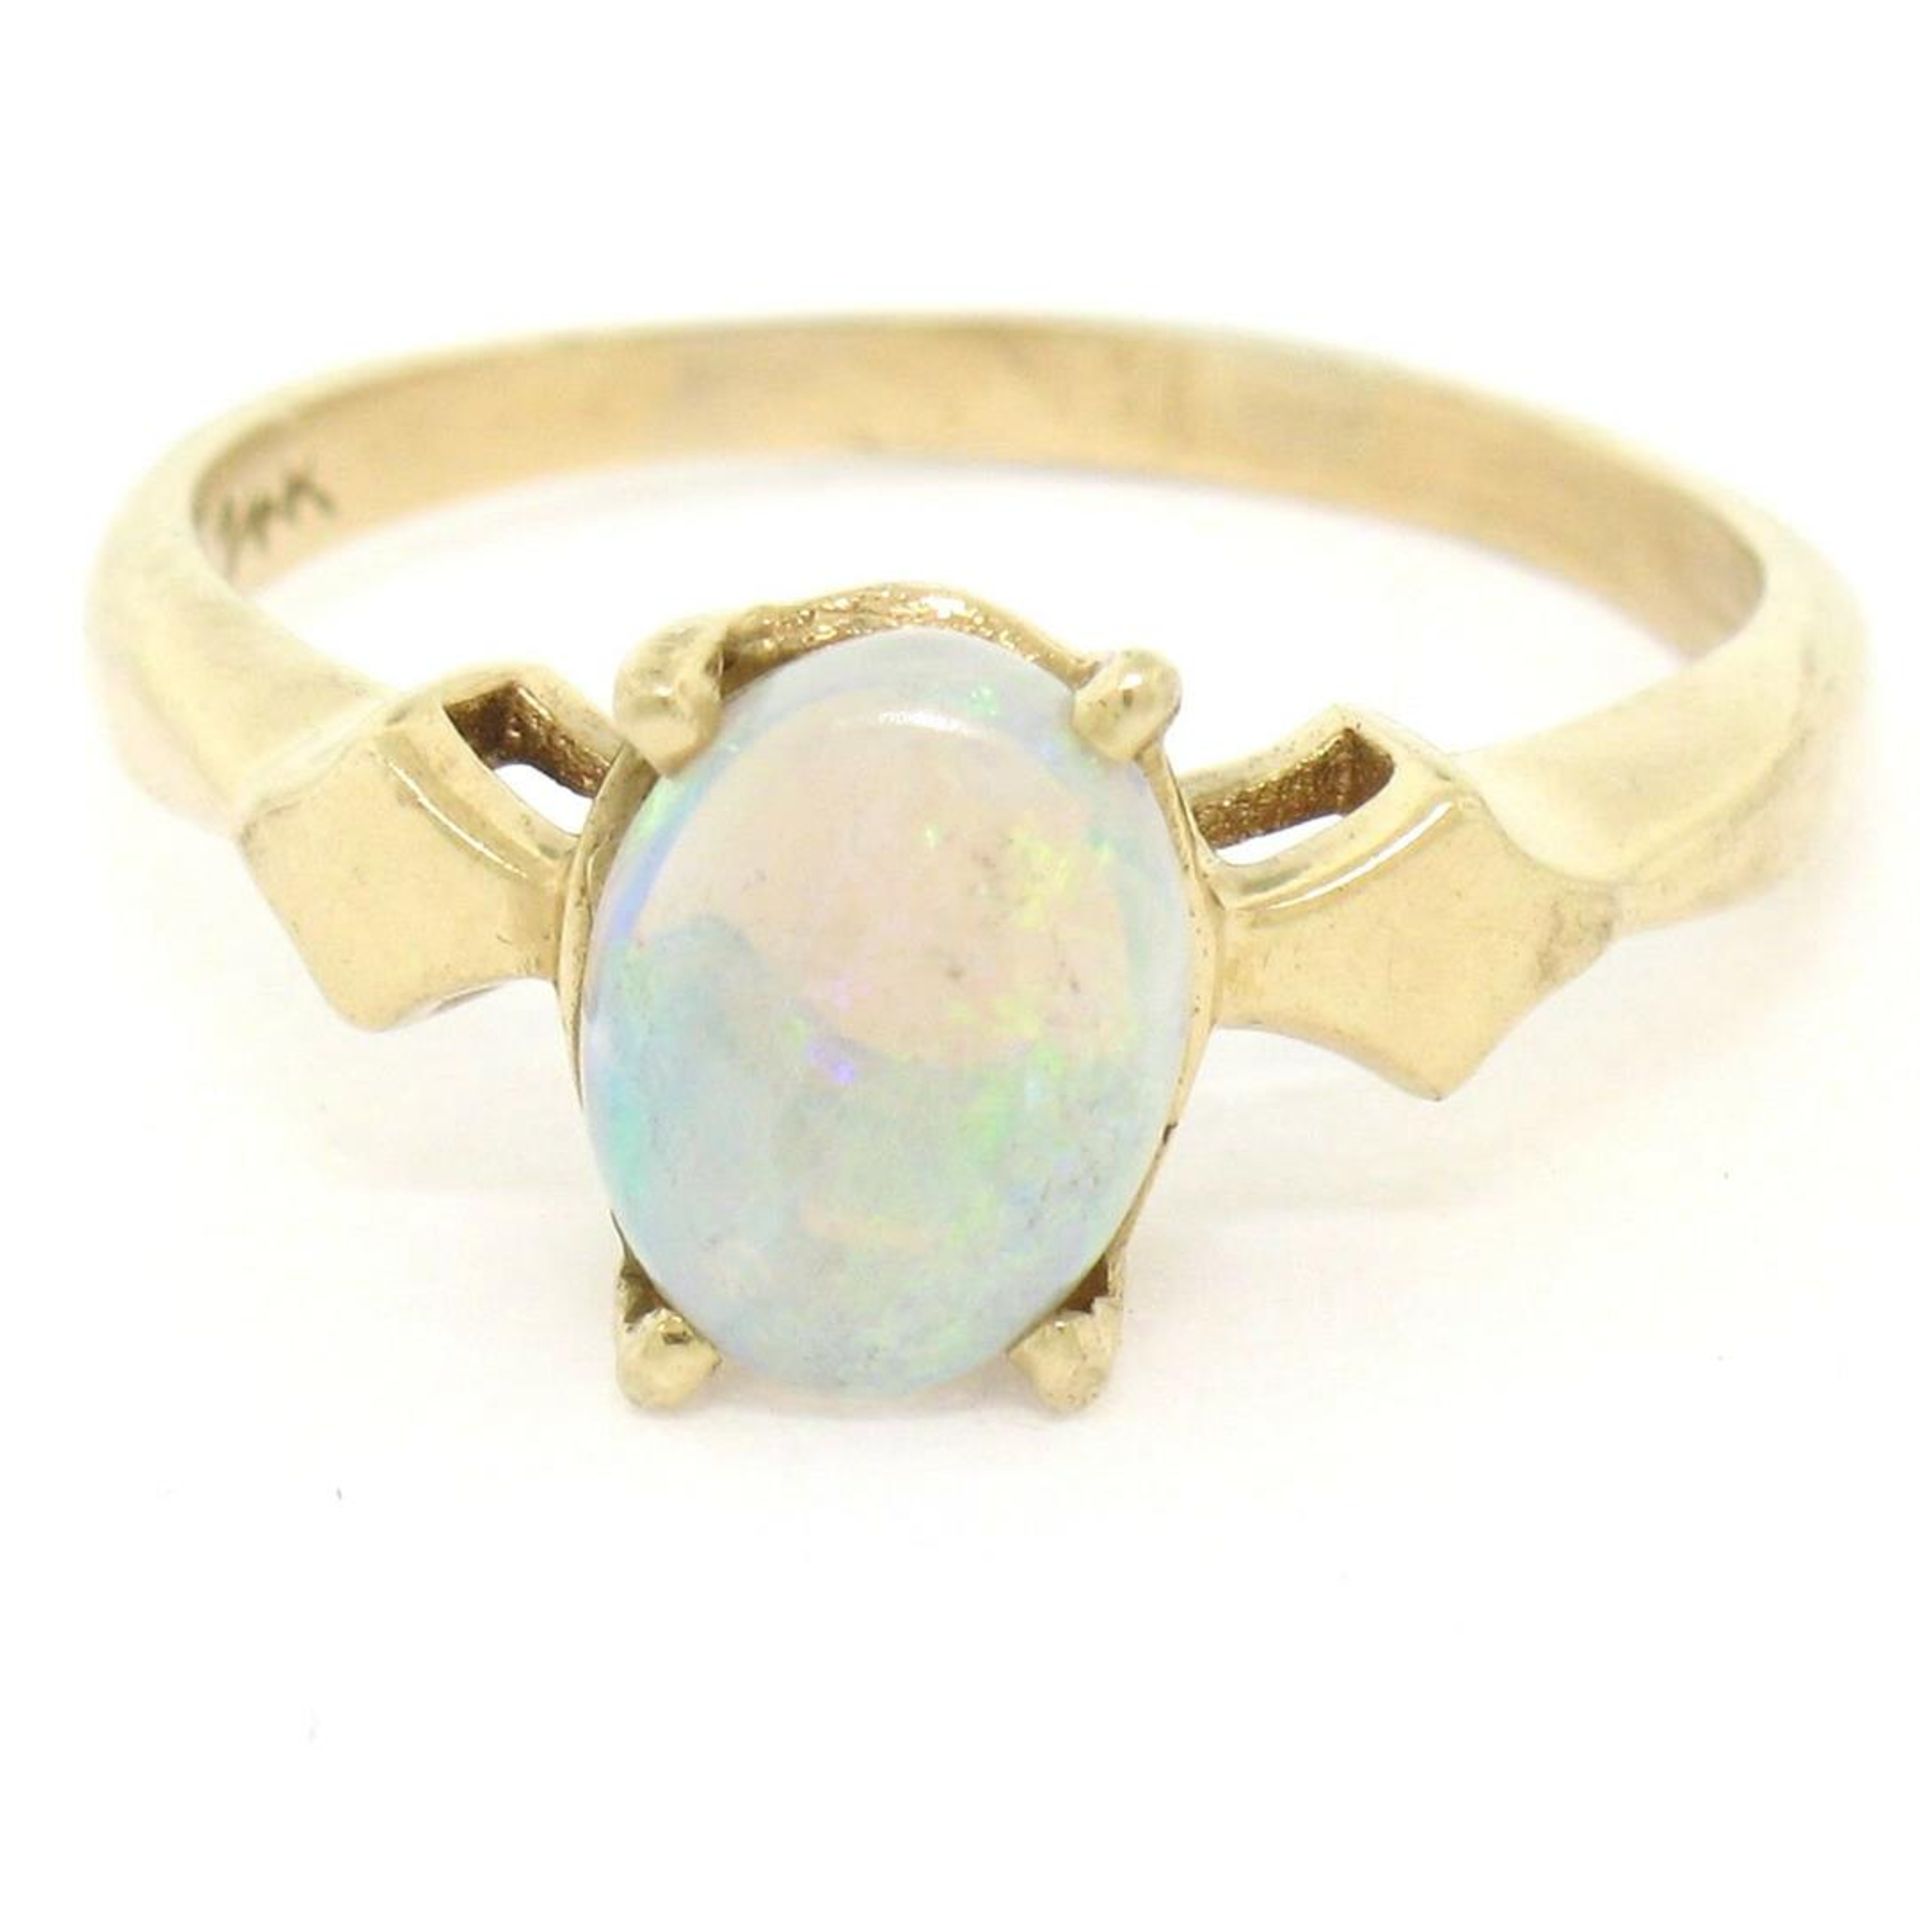 Vintage 14K Yellow Gold 0.65ct Petite Oval Cabochon Opal Solitaire Ring Size 6